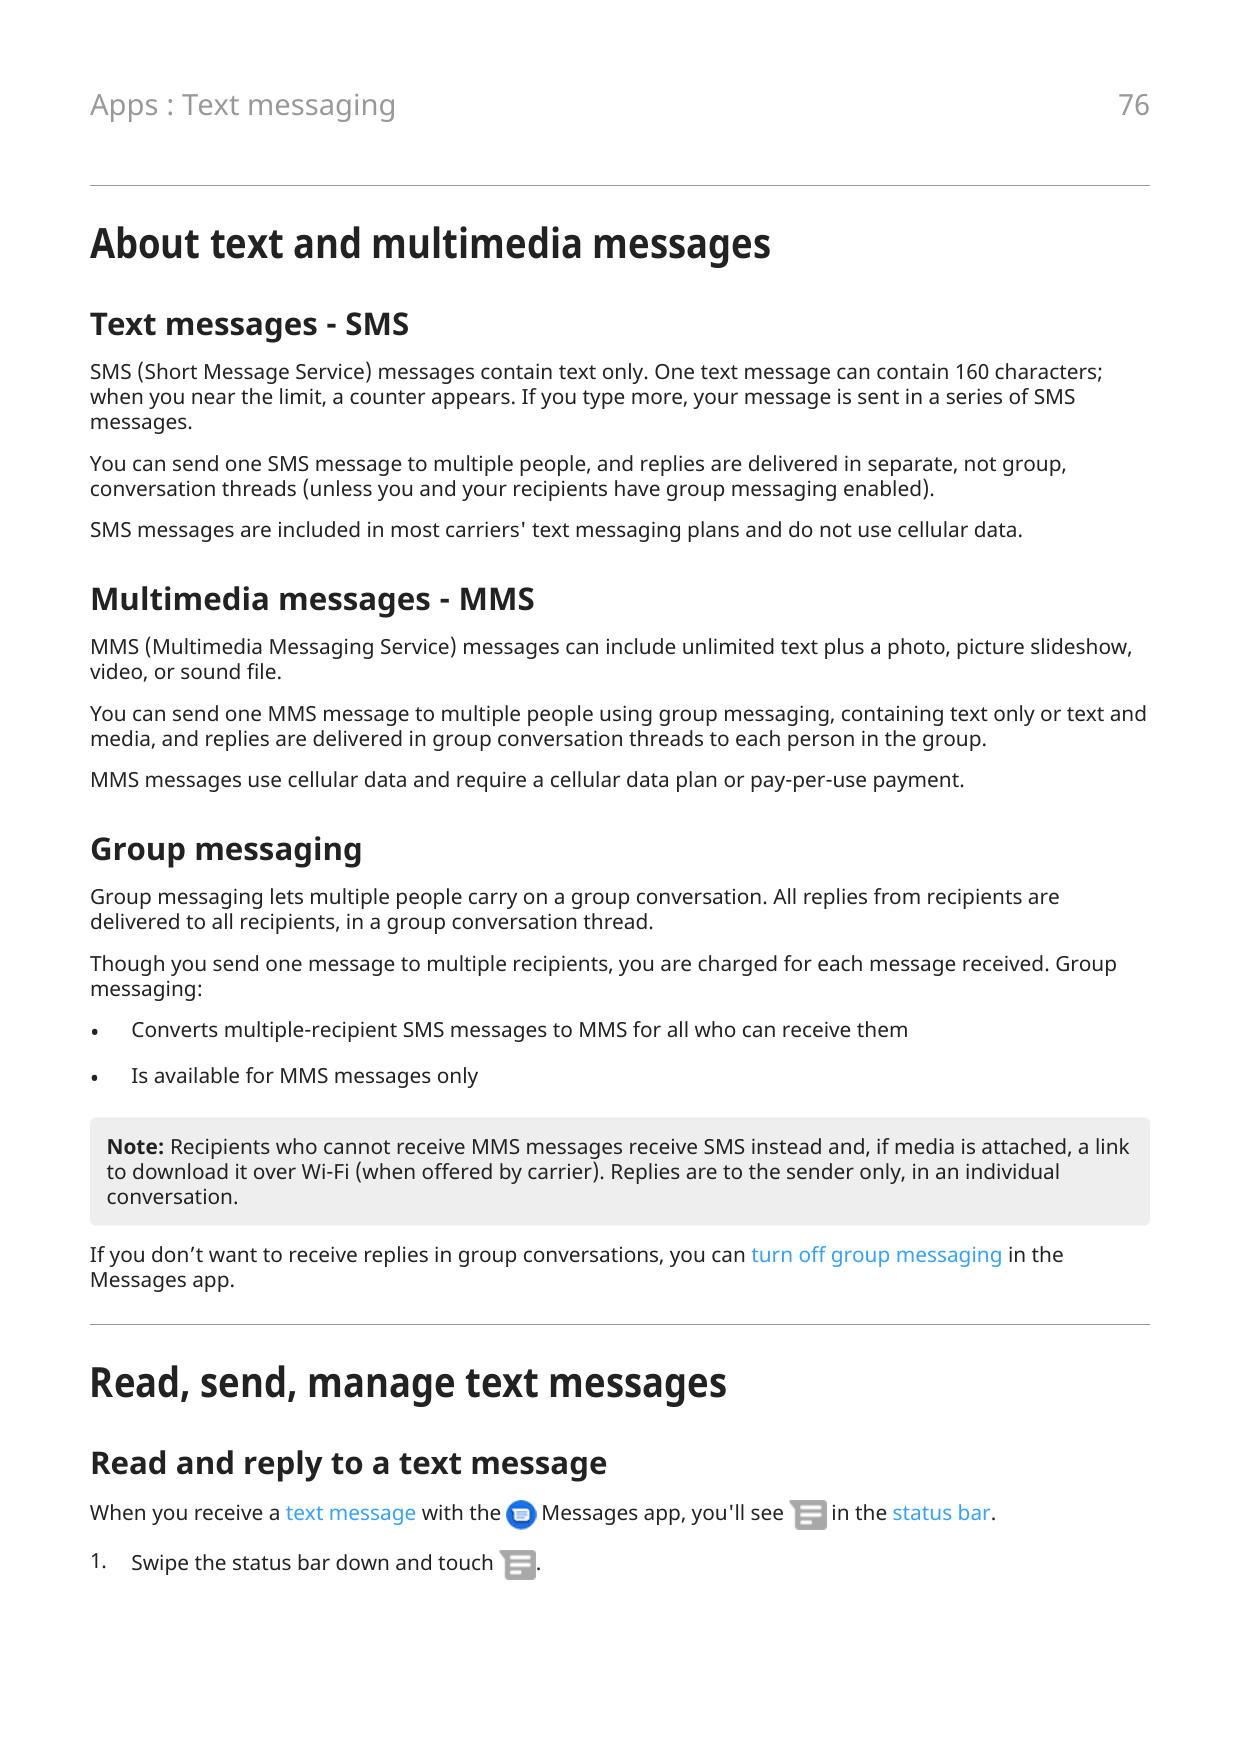 76Apps : Text messagingAbout text and multimedia messagesText messages - SMSSMS (Short Message Service) messages contain text on